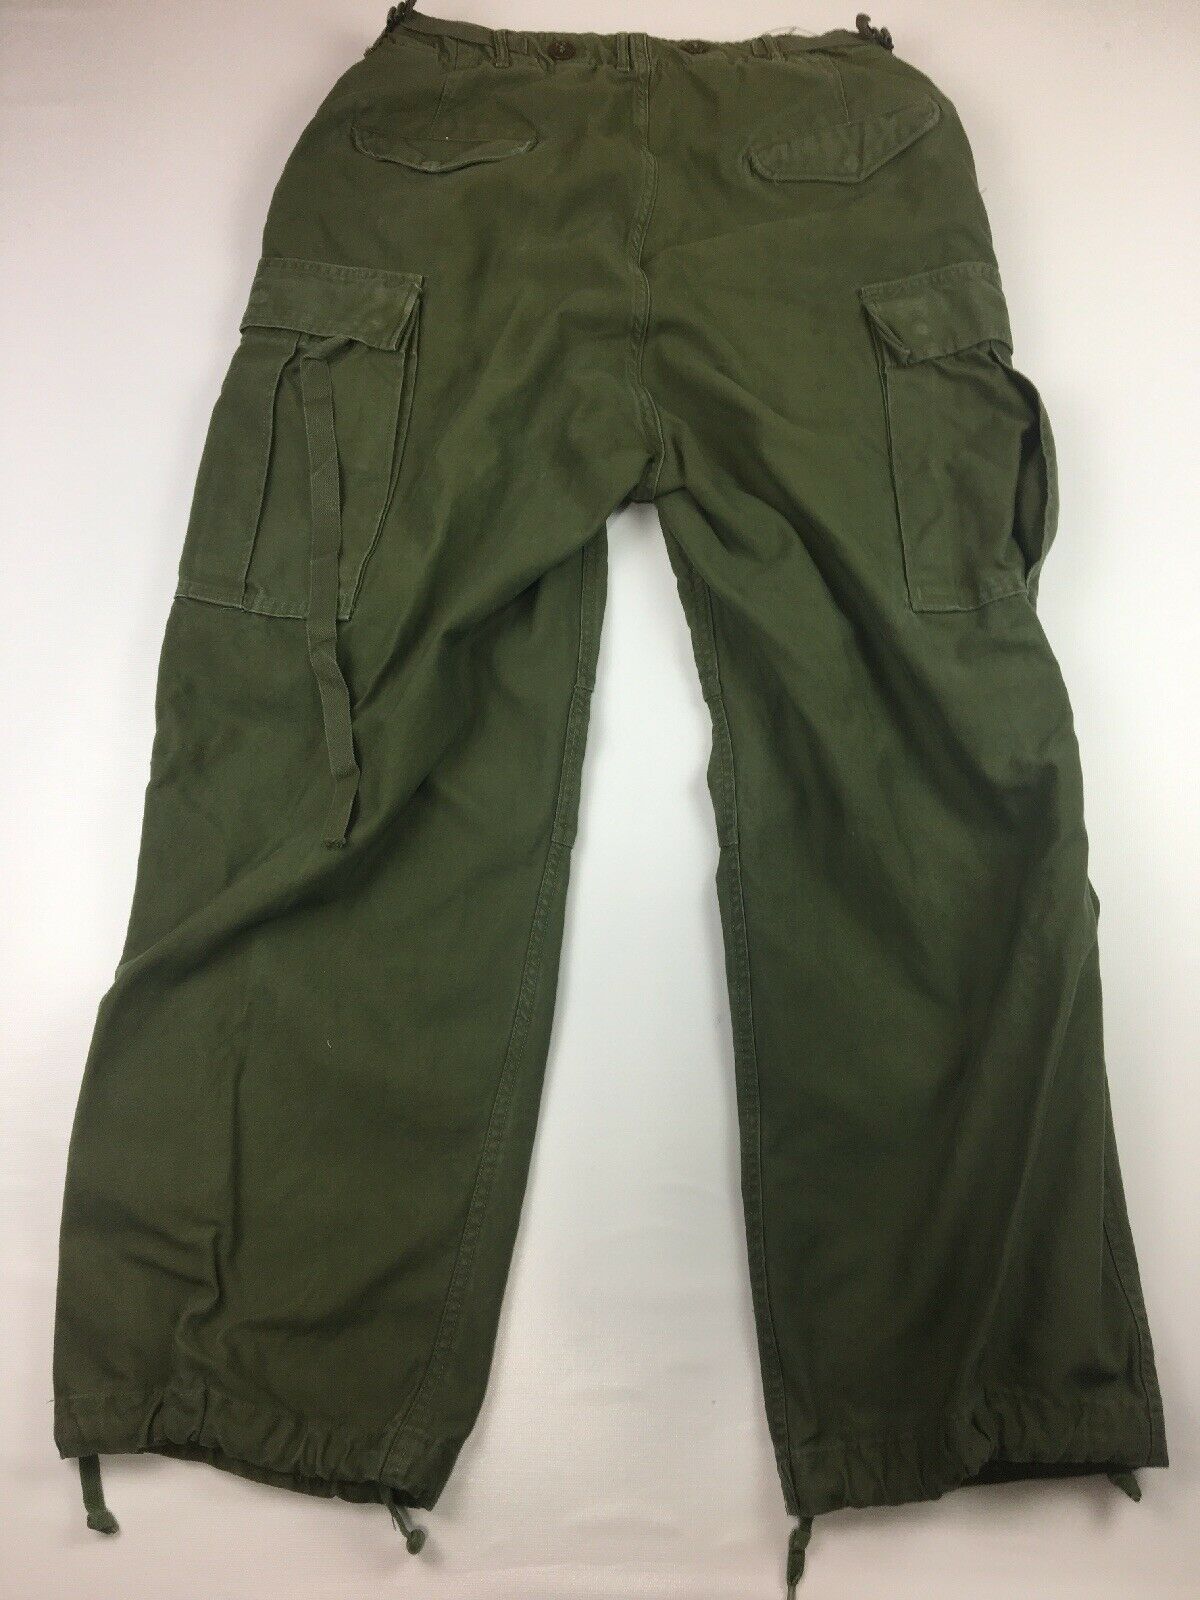 VTG ARMY COLD-WEATHER TROUSERS NO LINER SIZE (27-32 X 29) NO TAGS - Jeans